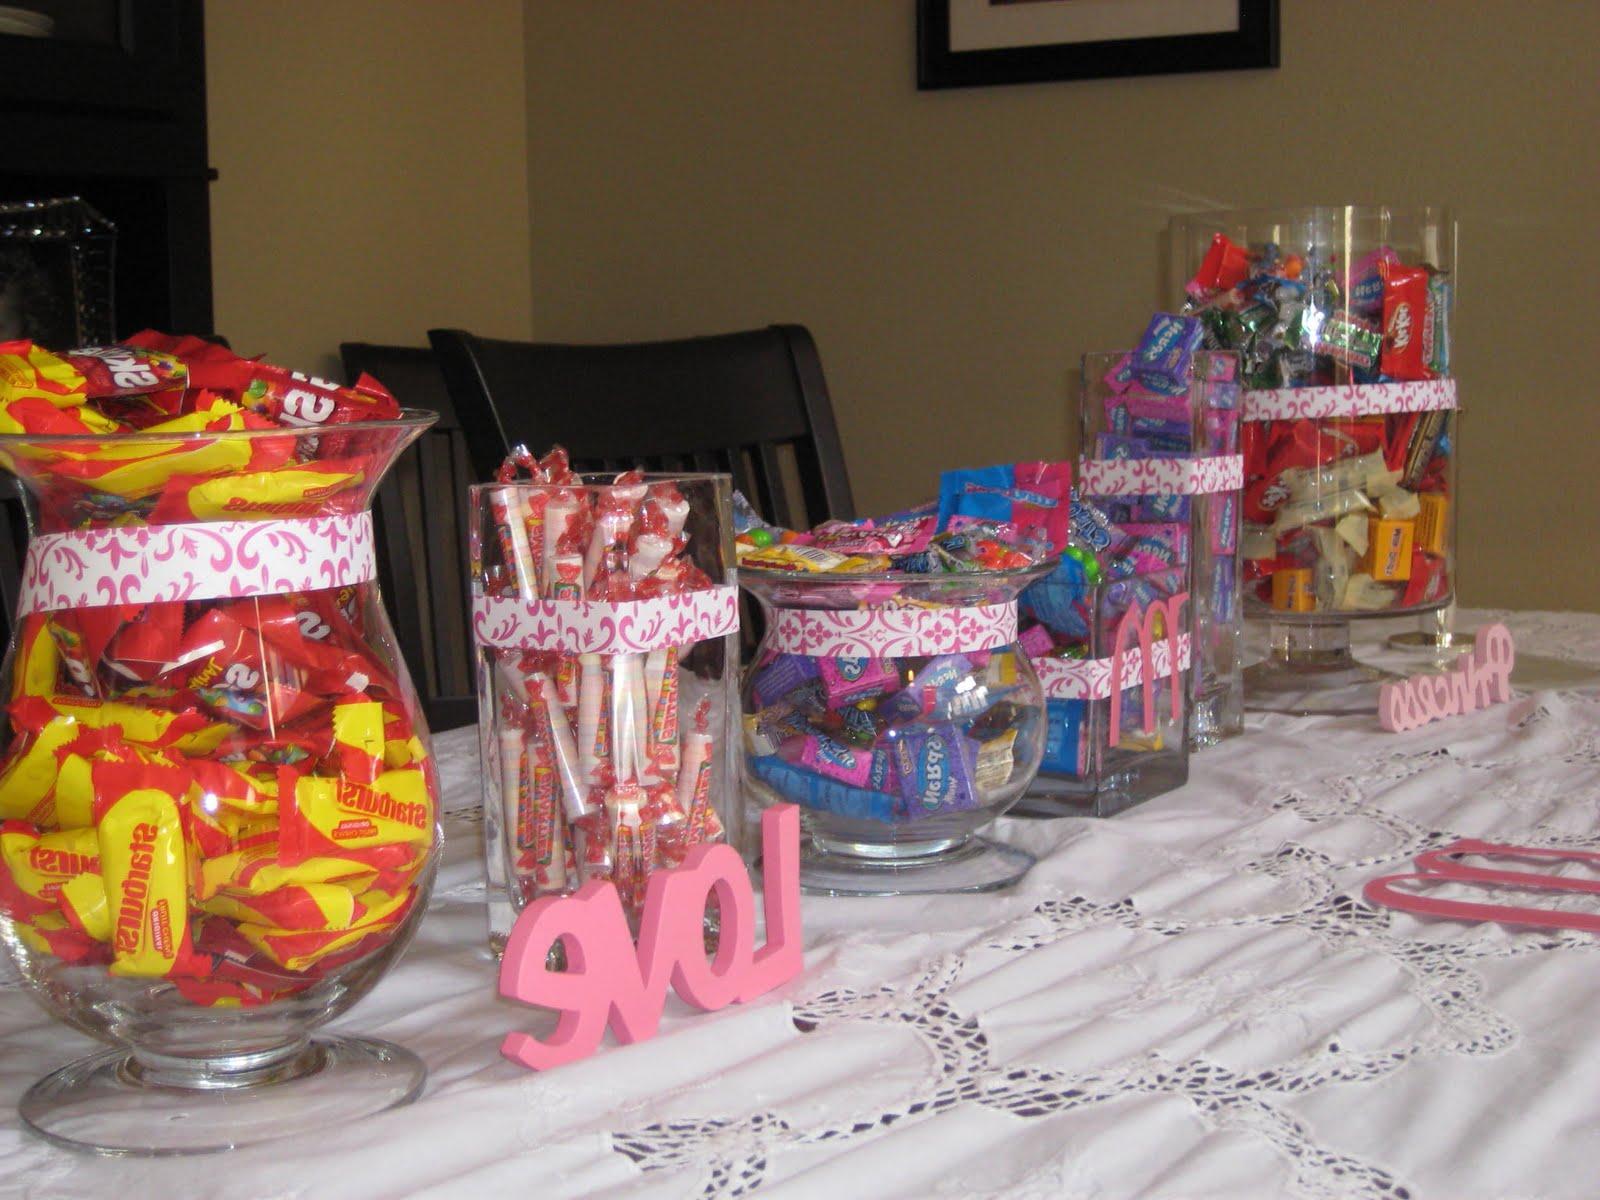 The candy buffet